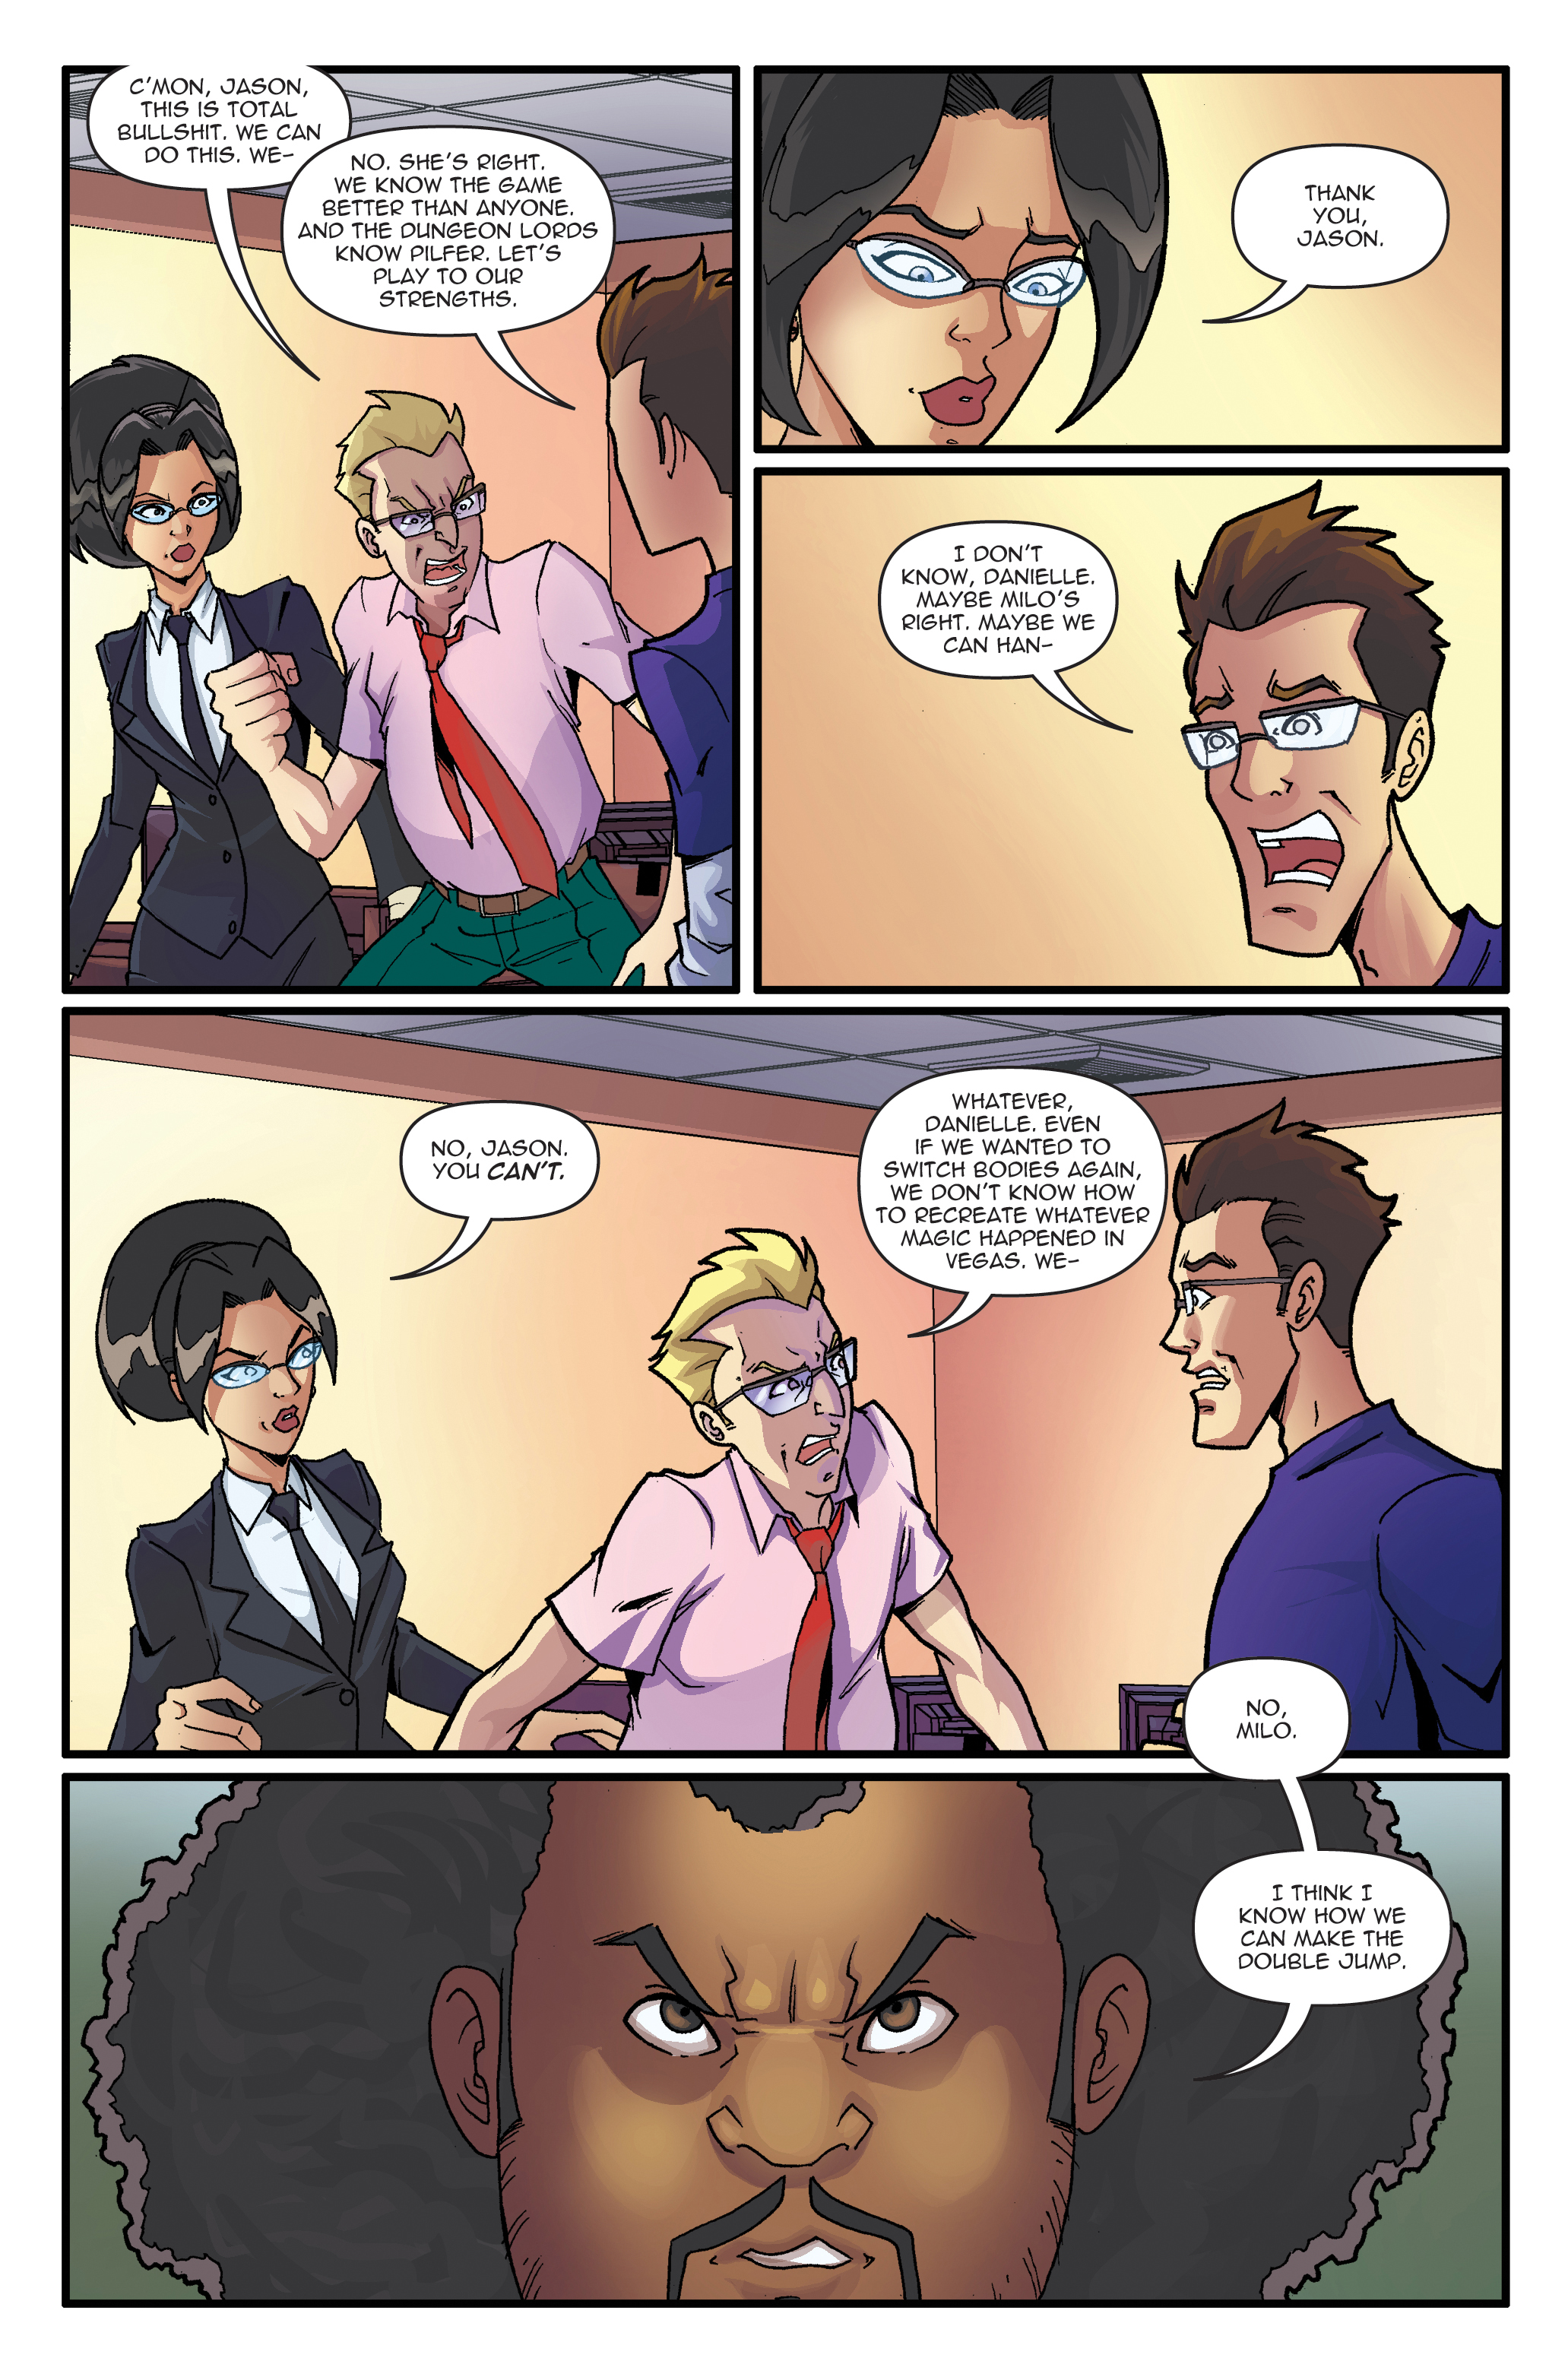 Double Jumpers Full Circle Jerks #1 Page 5.jpg